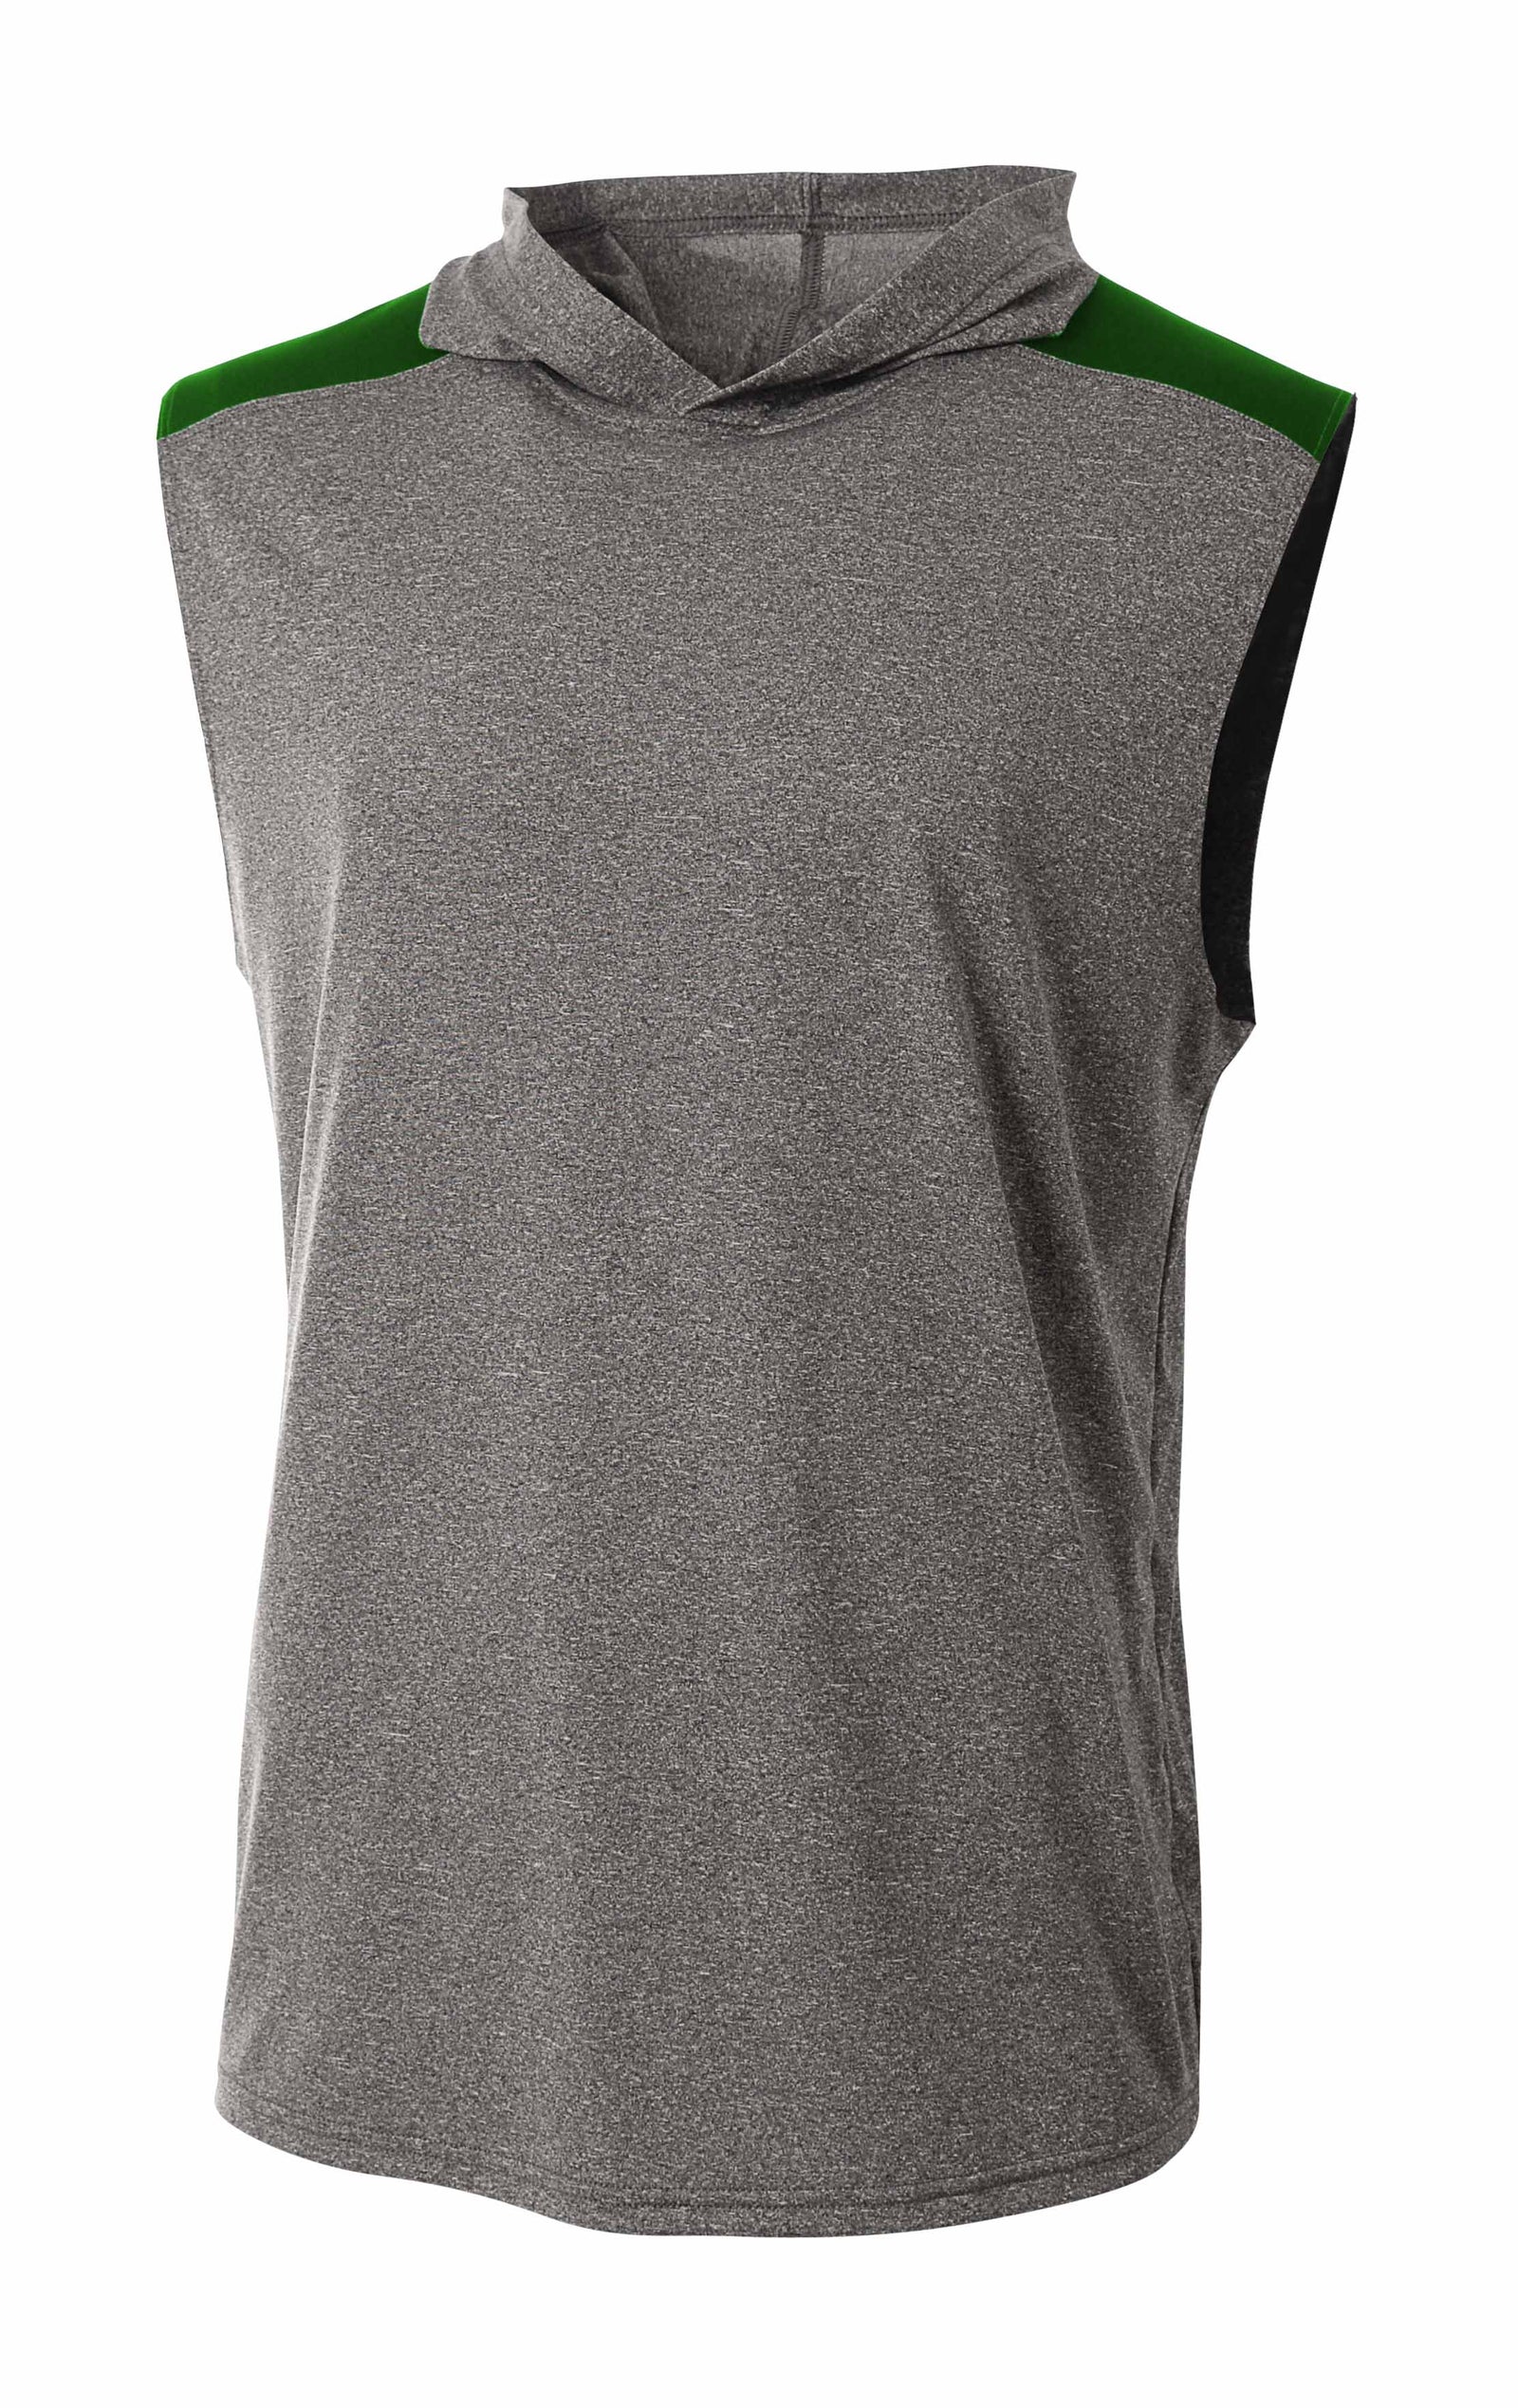 Heather/forest A4 A4 Tourney Sleeveless Hooded Tee